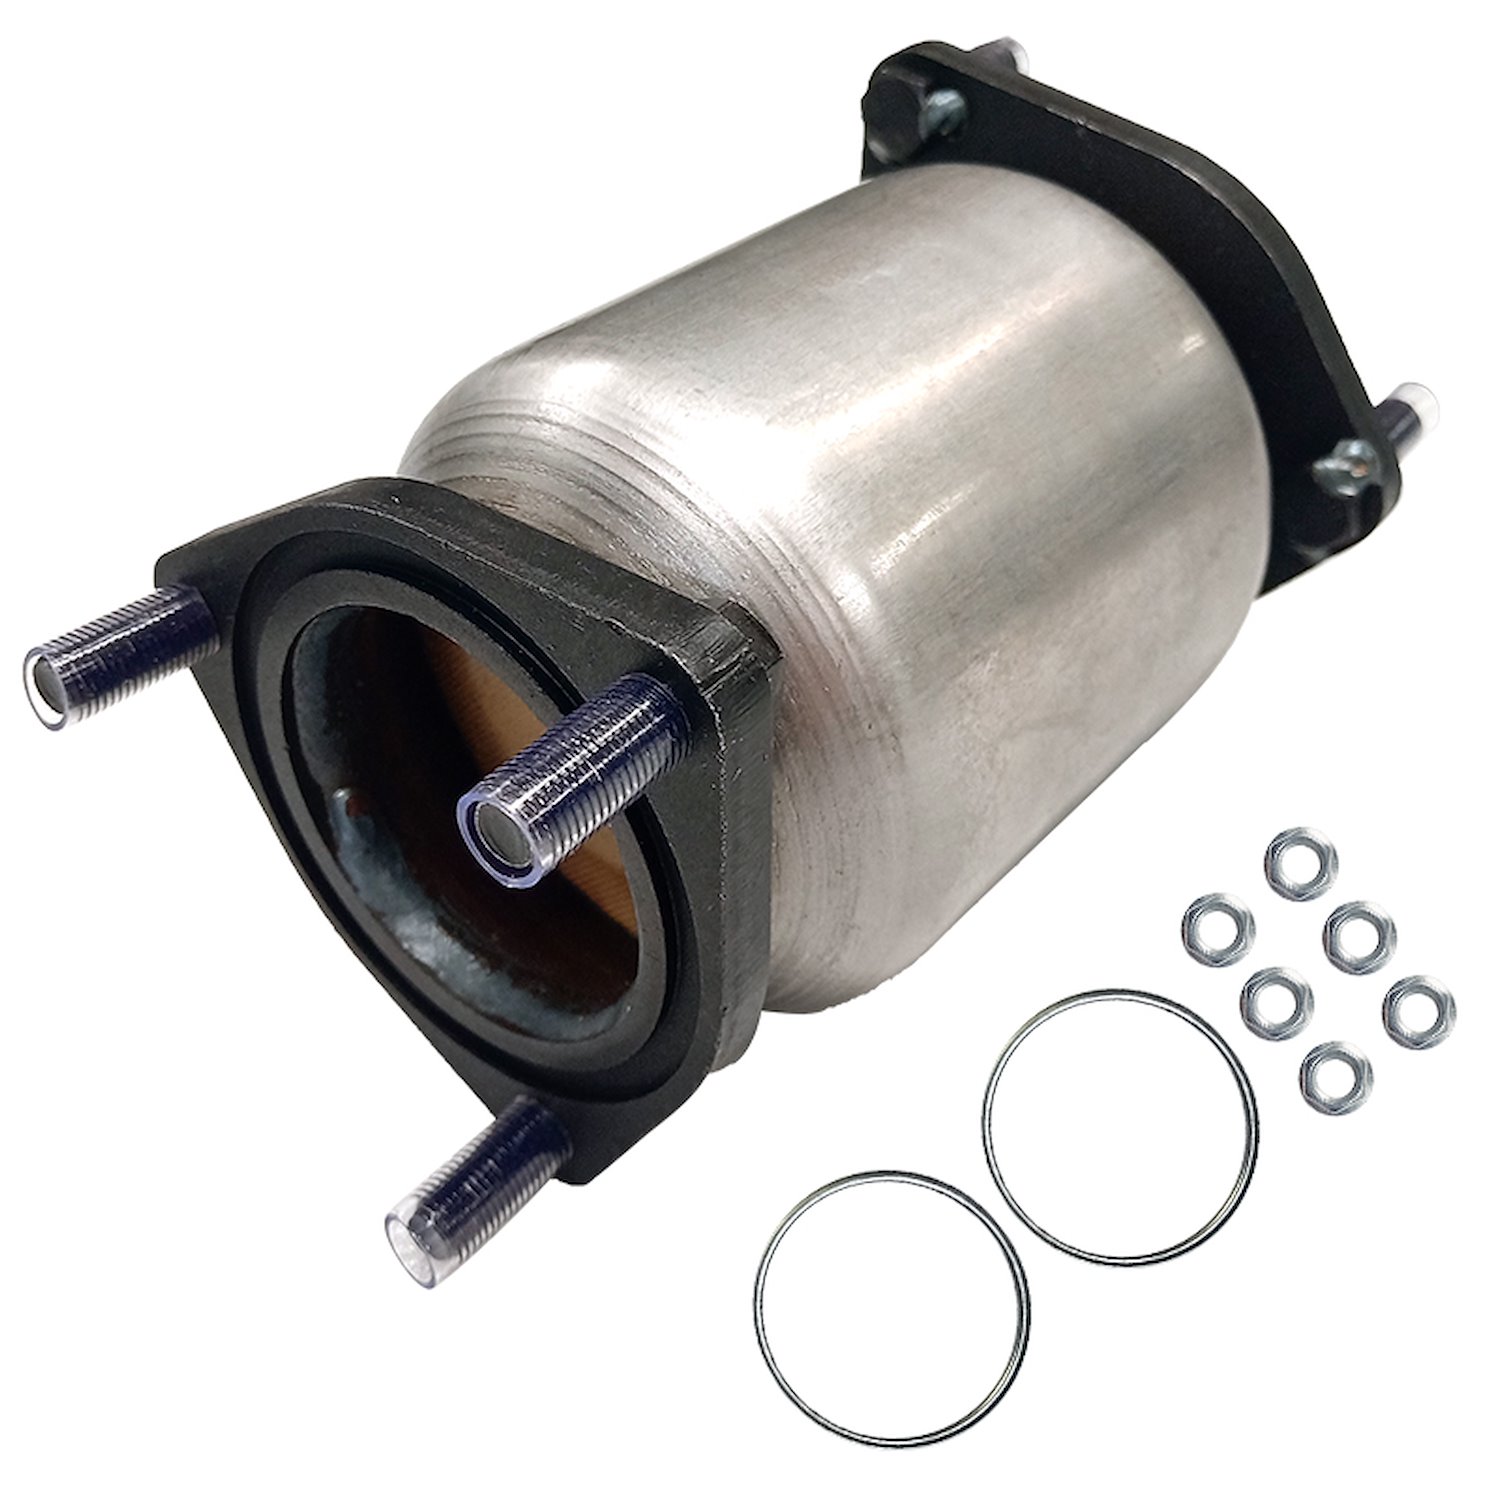 Catalytic Converter Fits 2004-2008 Chevrolet Aveo, 2006-2008 Chevrolet Aveo5, 1999-2002 Daewoo Lanos w/1.6L 4cyl. Eng. [Front]